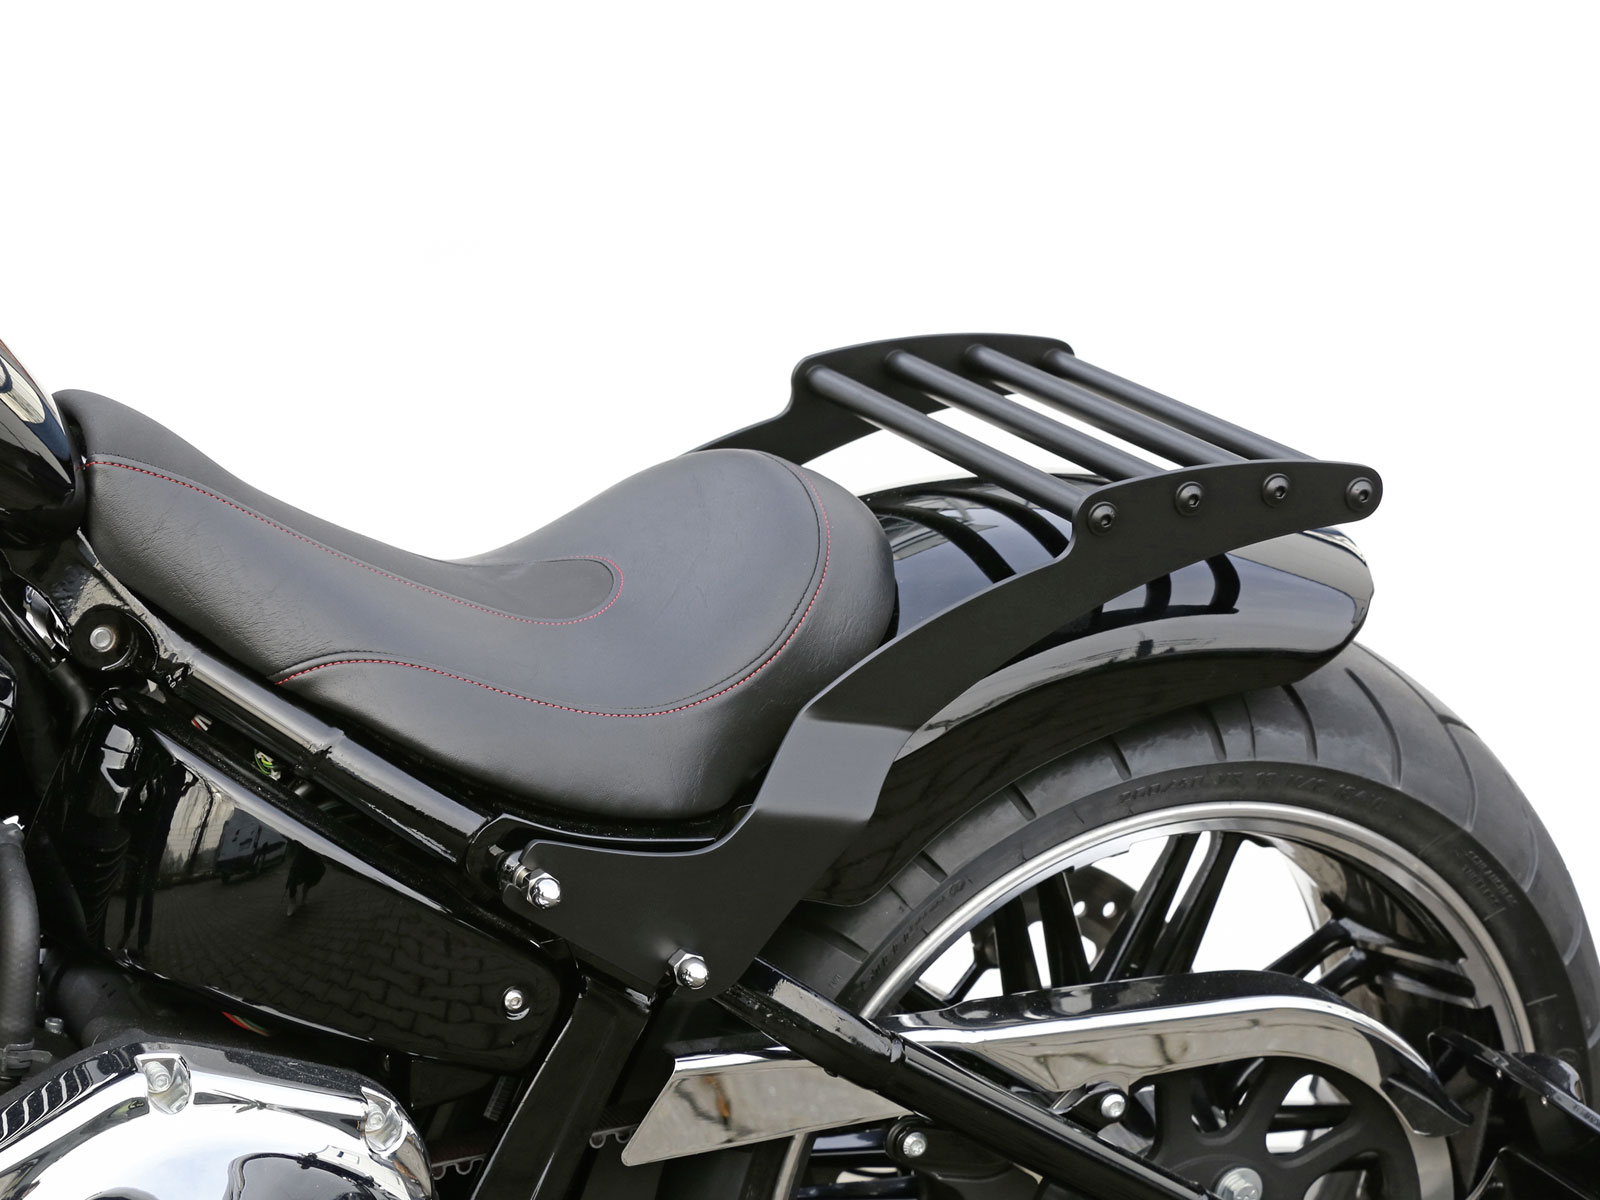 Custom Luggage Rack for Softail 18-later (except Fat Boy, Breakout & FXDR) at Thunderbike Shop